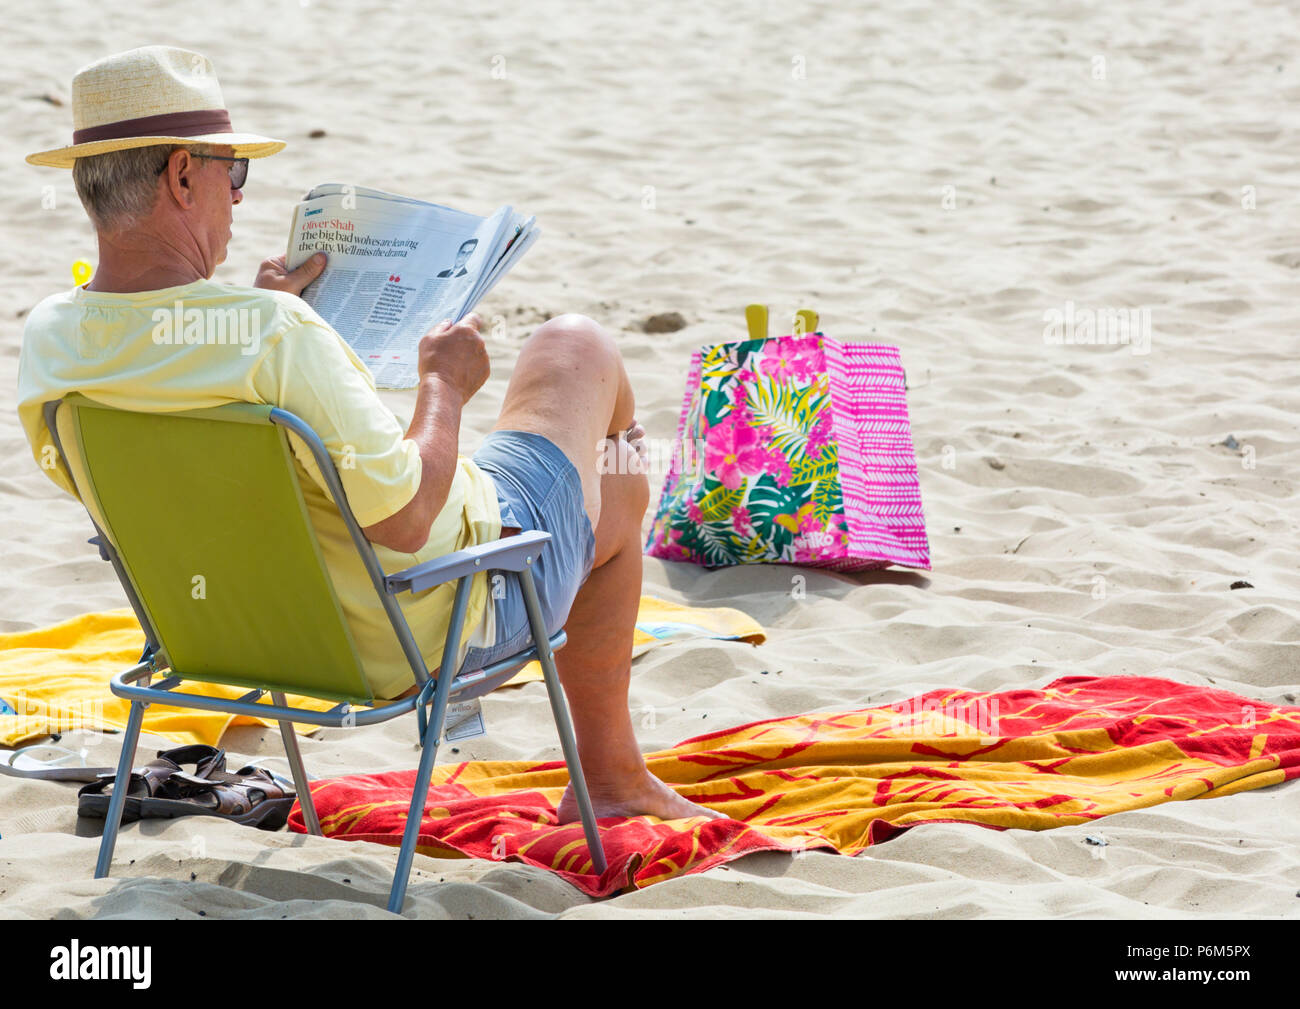 Bournemouth, Dorset, UK. 1st July 2018. UK weather: hazy sunshine, but still warm as thousands of sunseekers head to the beaches at Bournemouth to enjoy a day at the seaside. Man sitting in chair reading the Sunday Times newspaper. Credit: Carolyn Jenkins/Alamy Live News Stock Photo